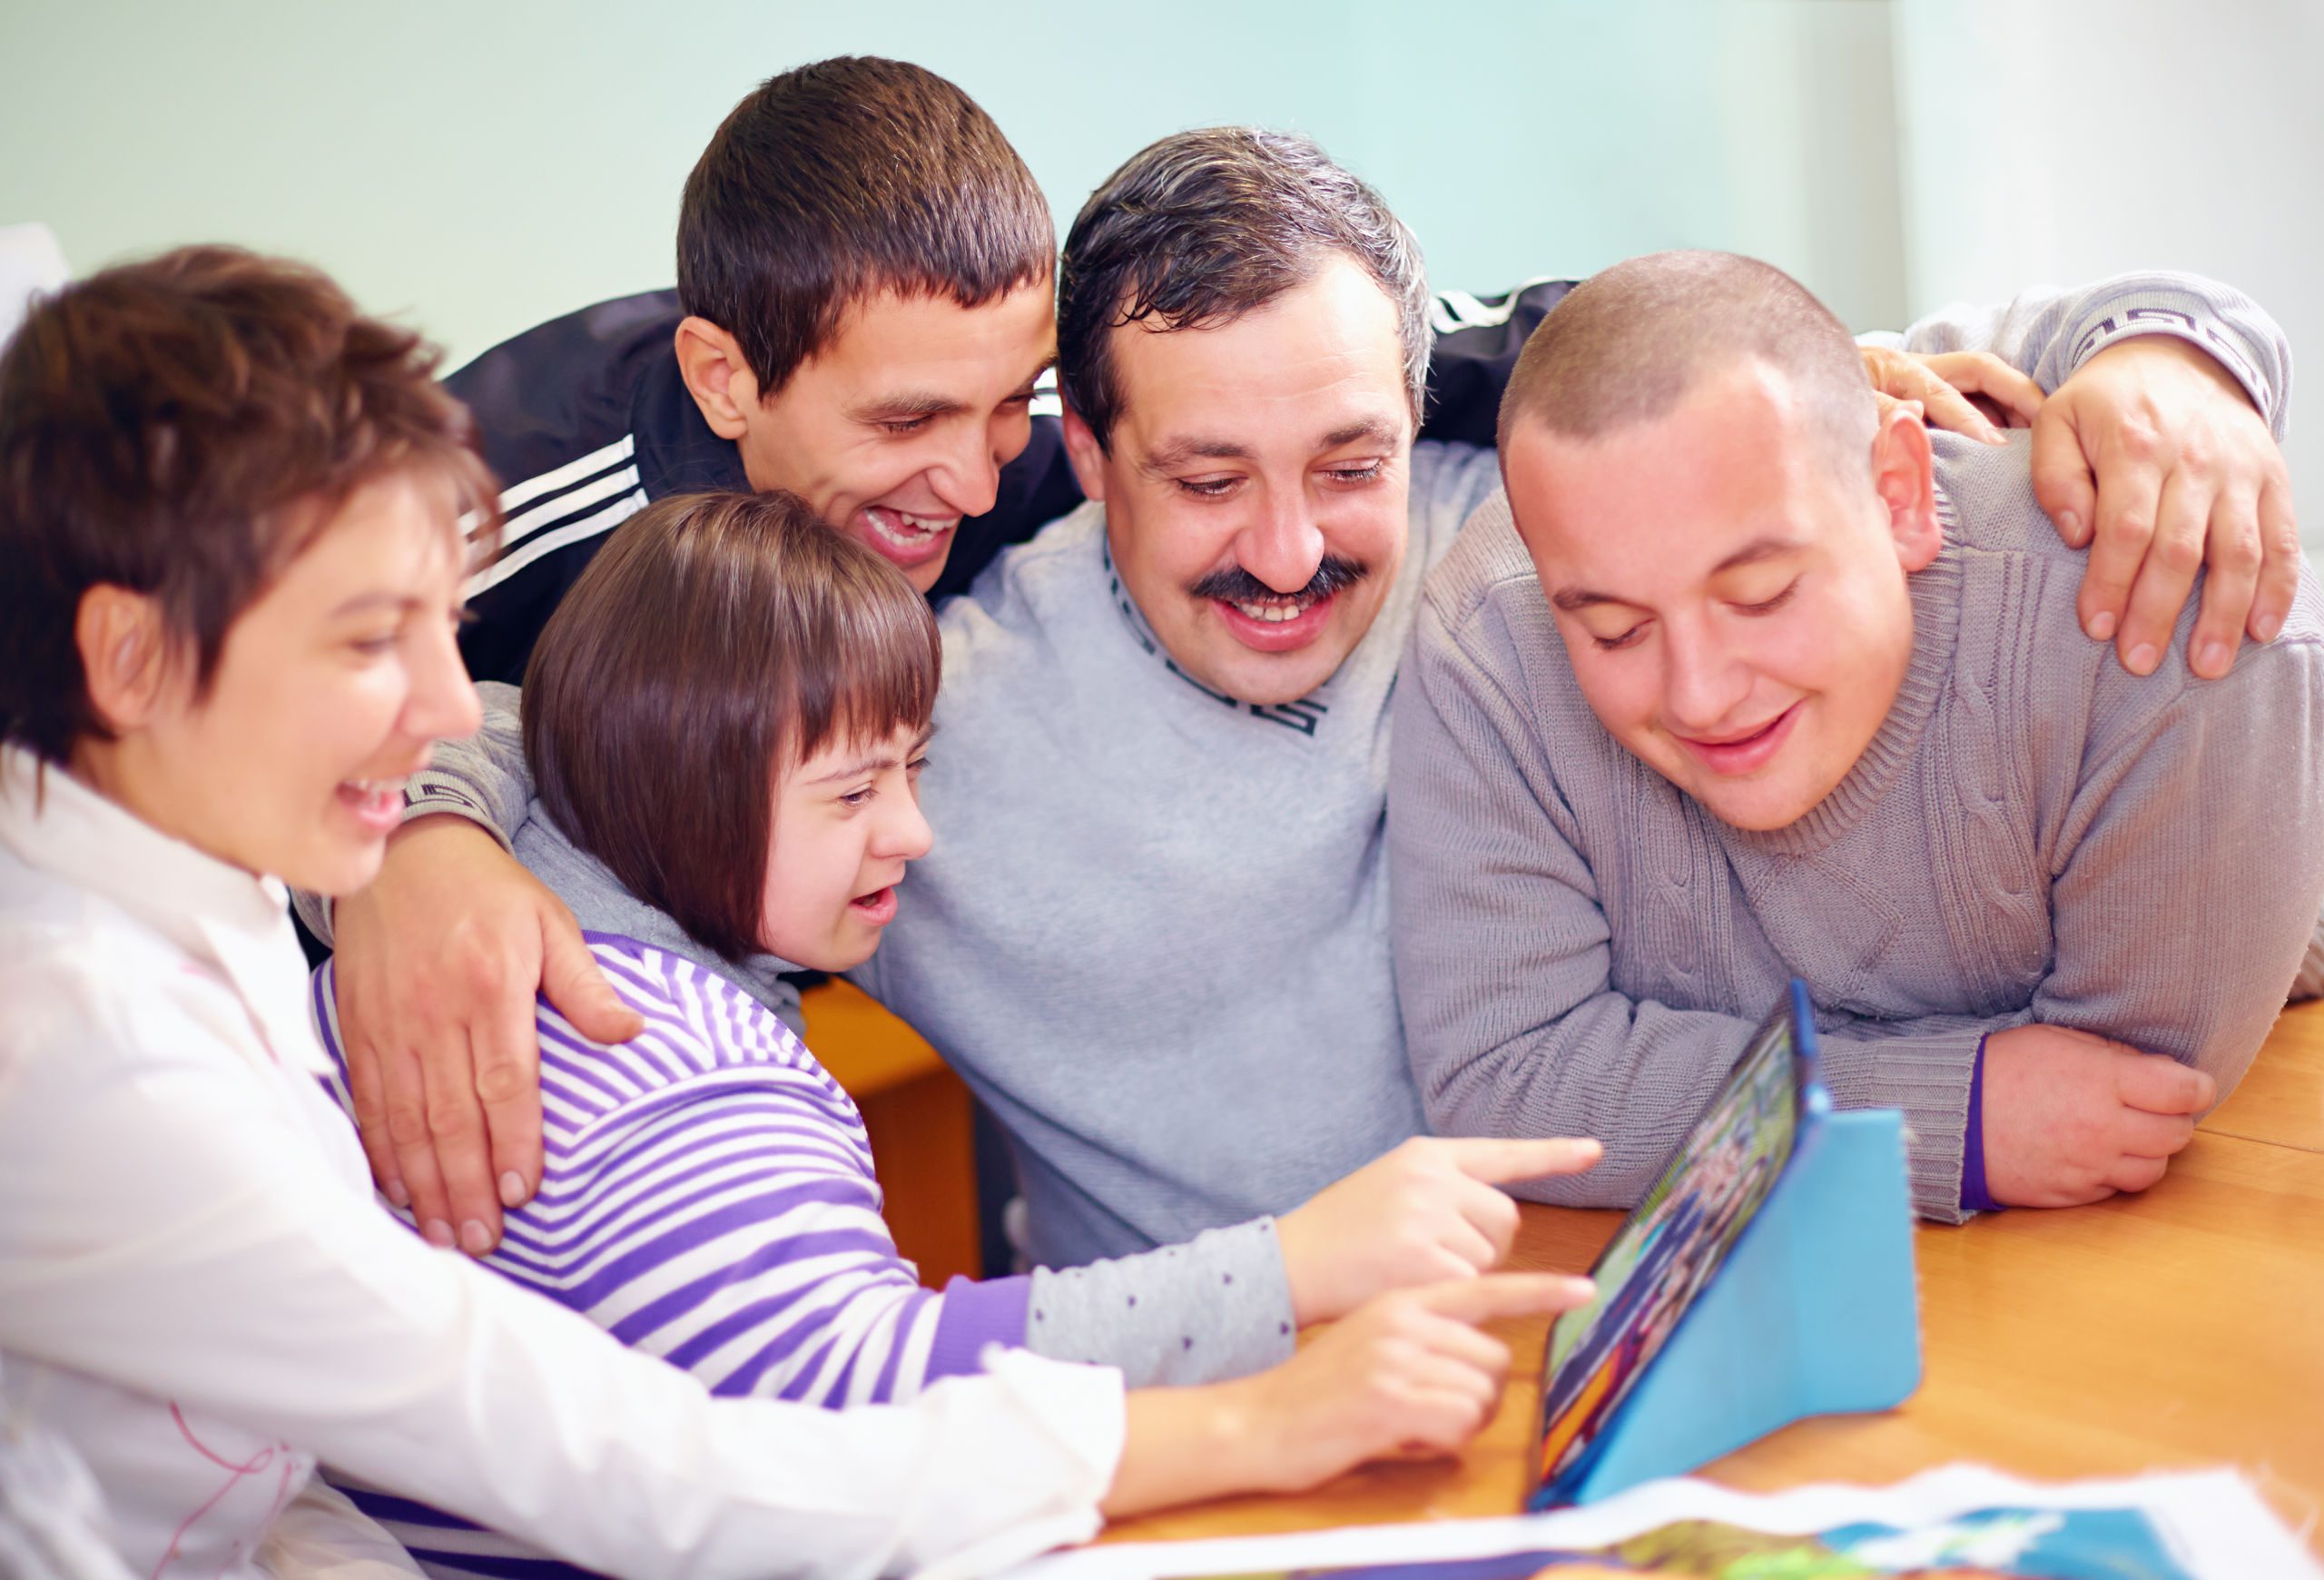 A family of five smiling and clustered over a tablet computer. The daughter has a developmental disability and is pointing at the screen with her mother.